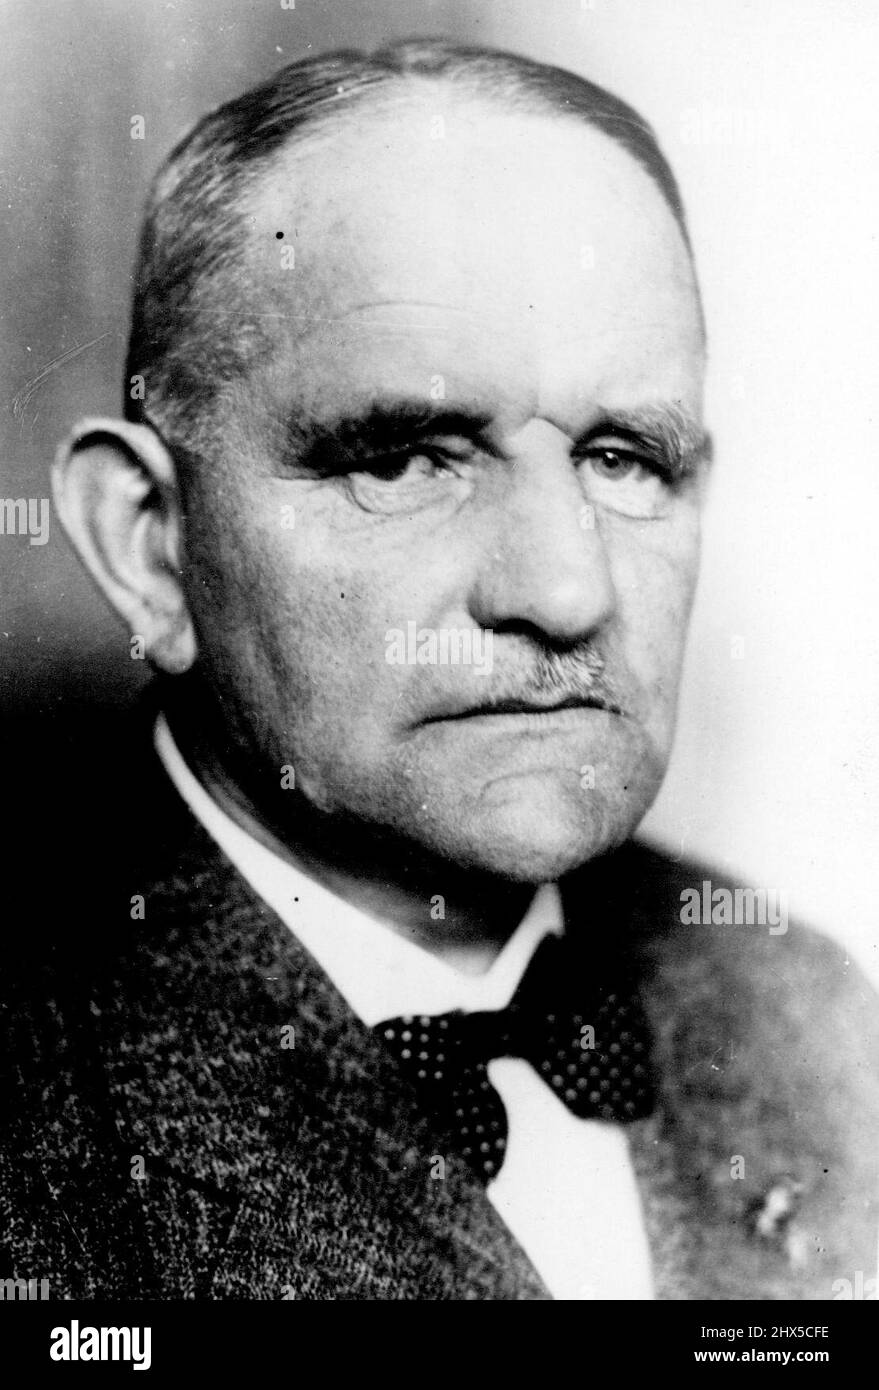 General A.D. Faupel, who is to be Franco's Charge D'Affaires in the Government at Salamanca. General Faupel was until now, Leader of the Ibero-American Institute and for a long time President of The German Spanish Society. General A.D. Faupel. November 23, 1936. Stock Photo